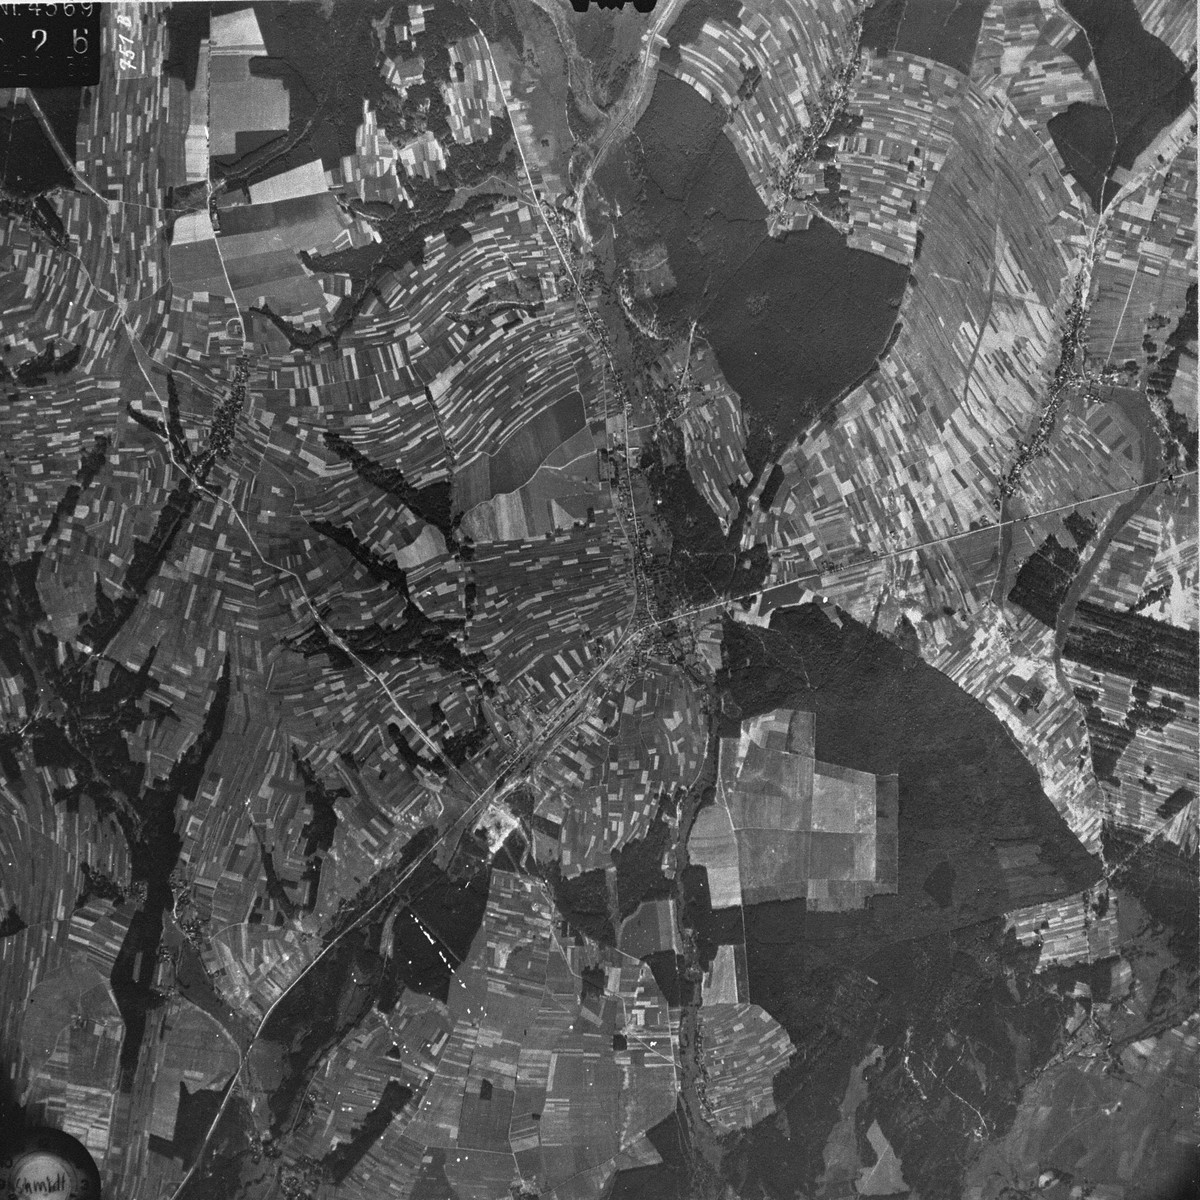 An aerial view of the Belzec area taken by the Luftwaffe during the war, which shows the camp and the rail lines leading to it.